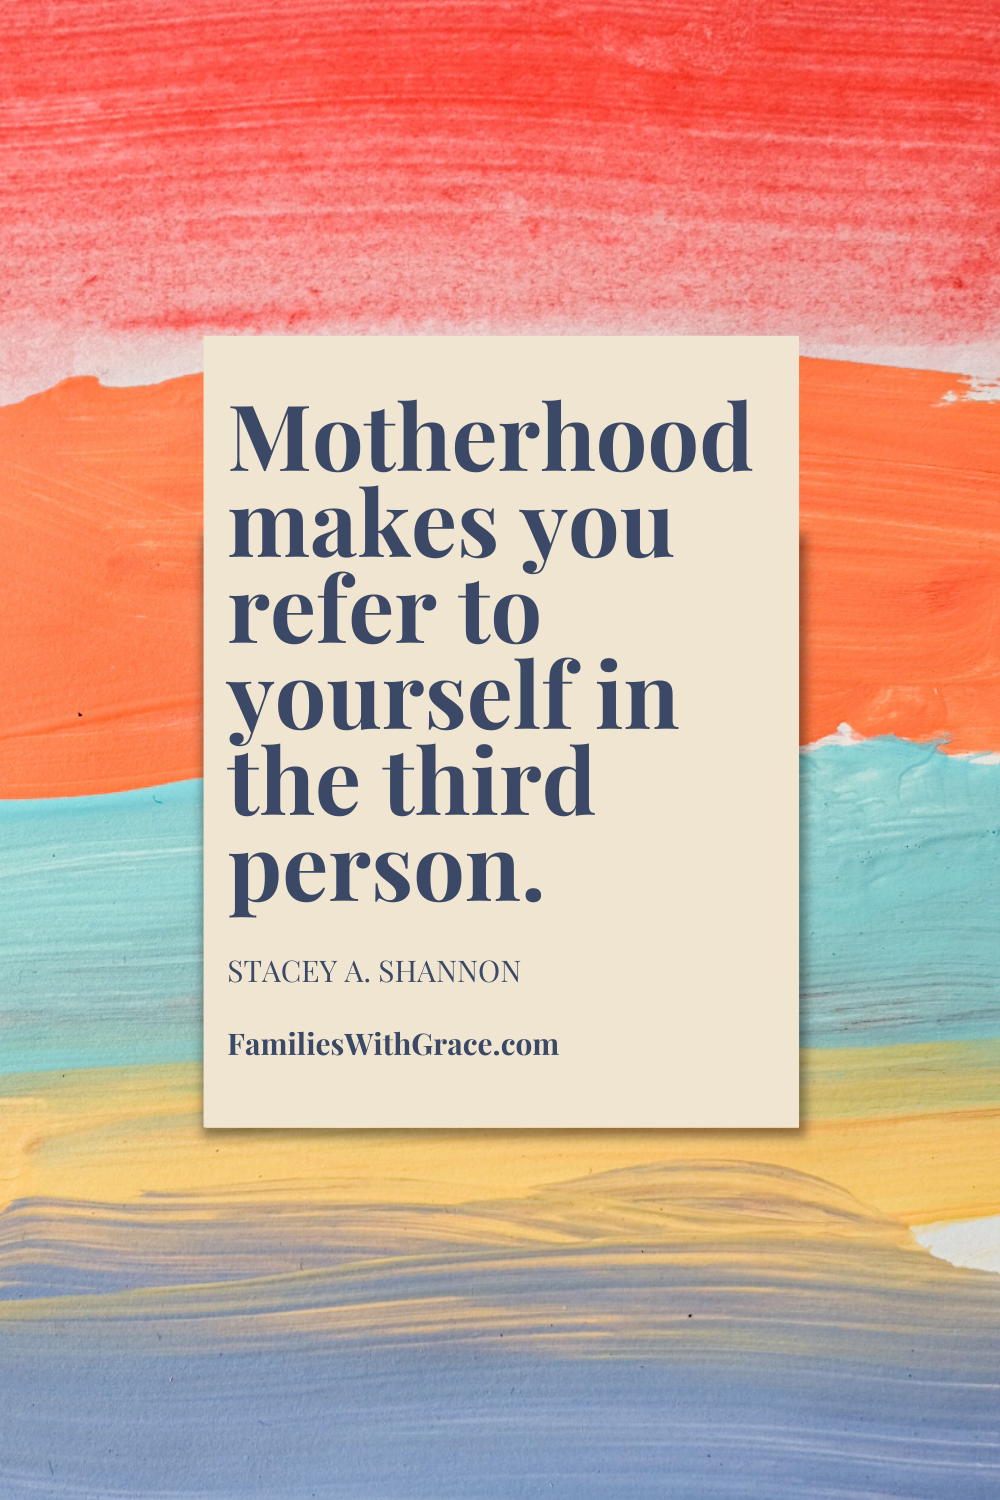 60 Motherhood truths to inspire you and make you laugh